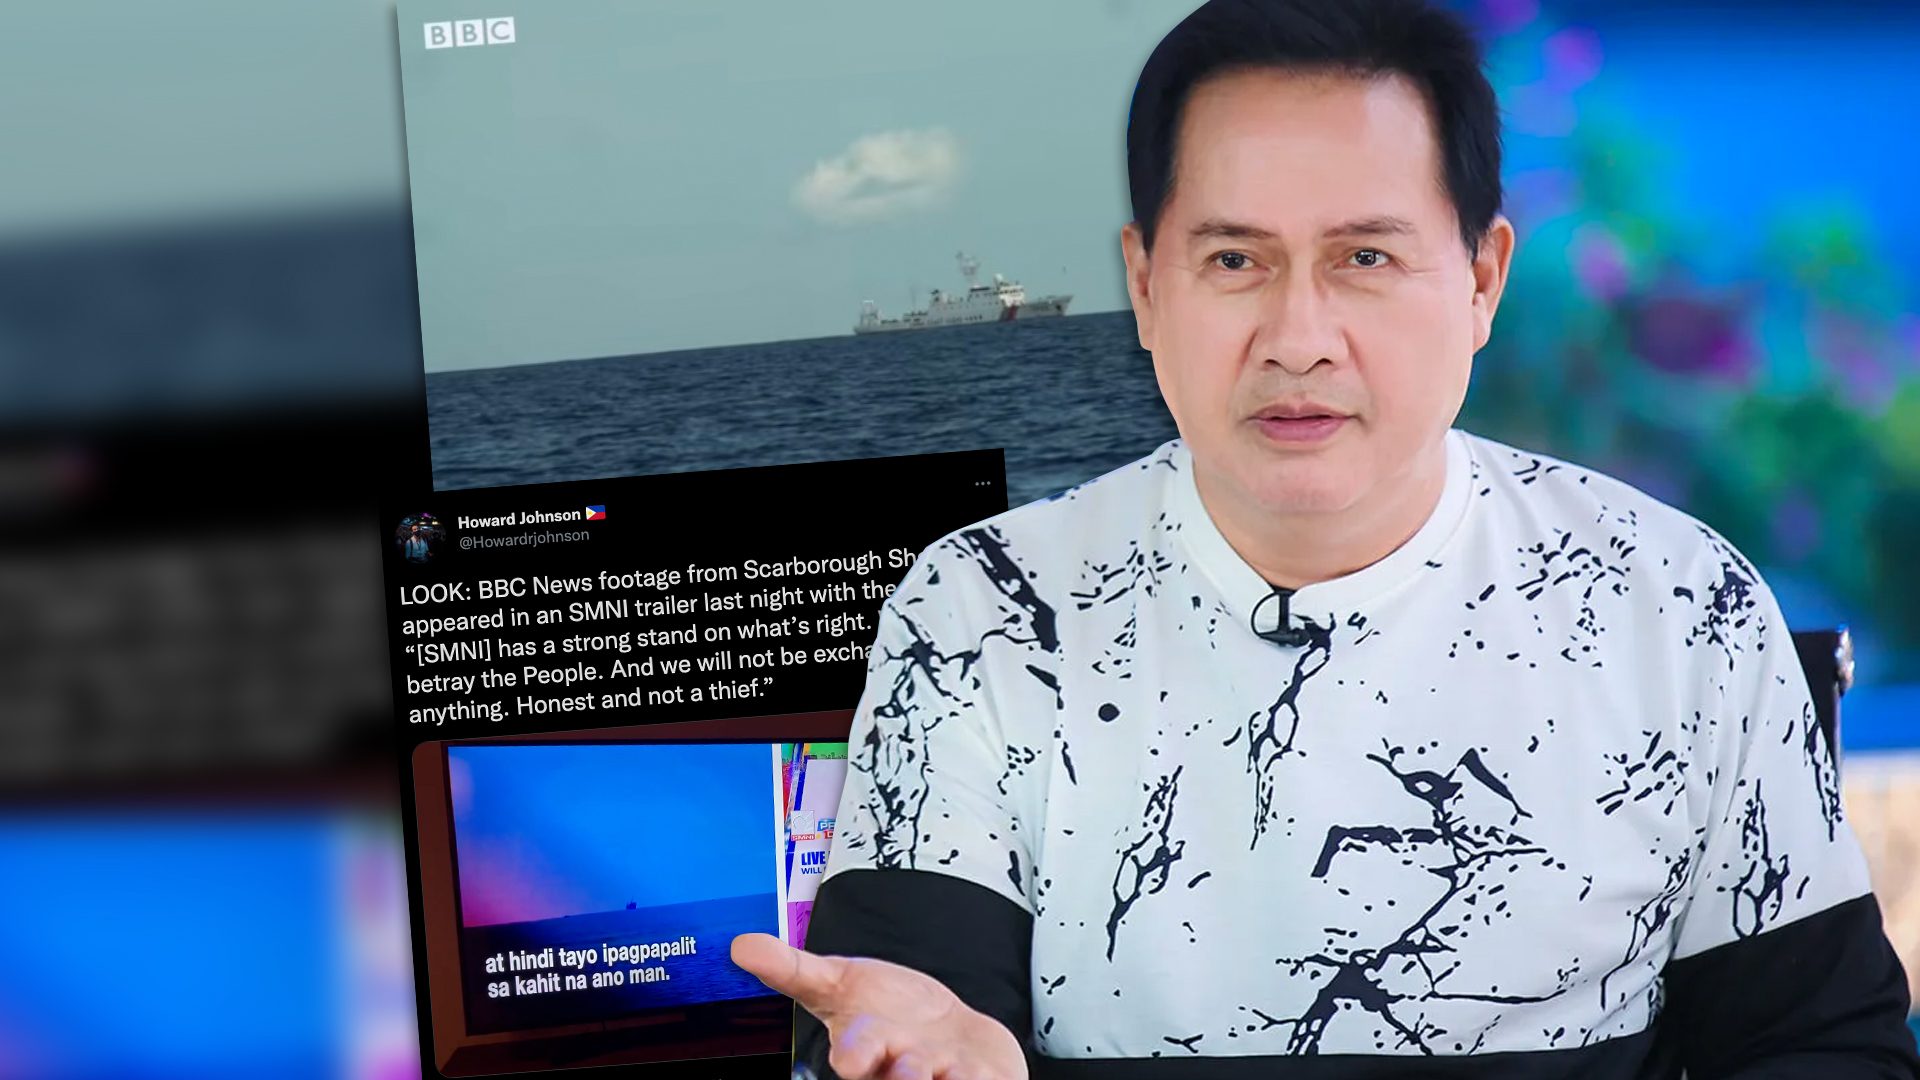 BBC says Quiboloy’s SMNI used their Scarborough video without consent